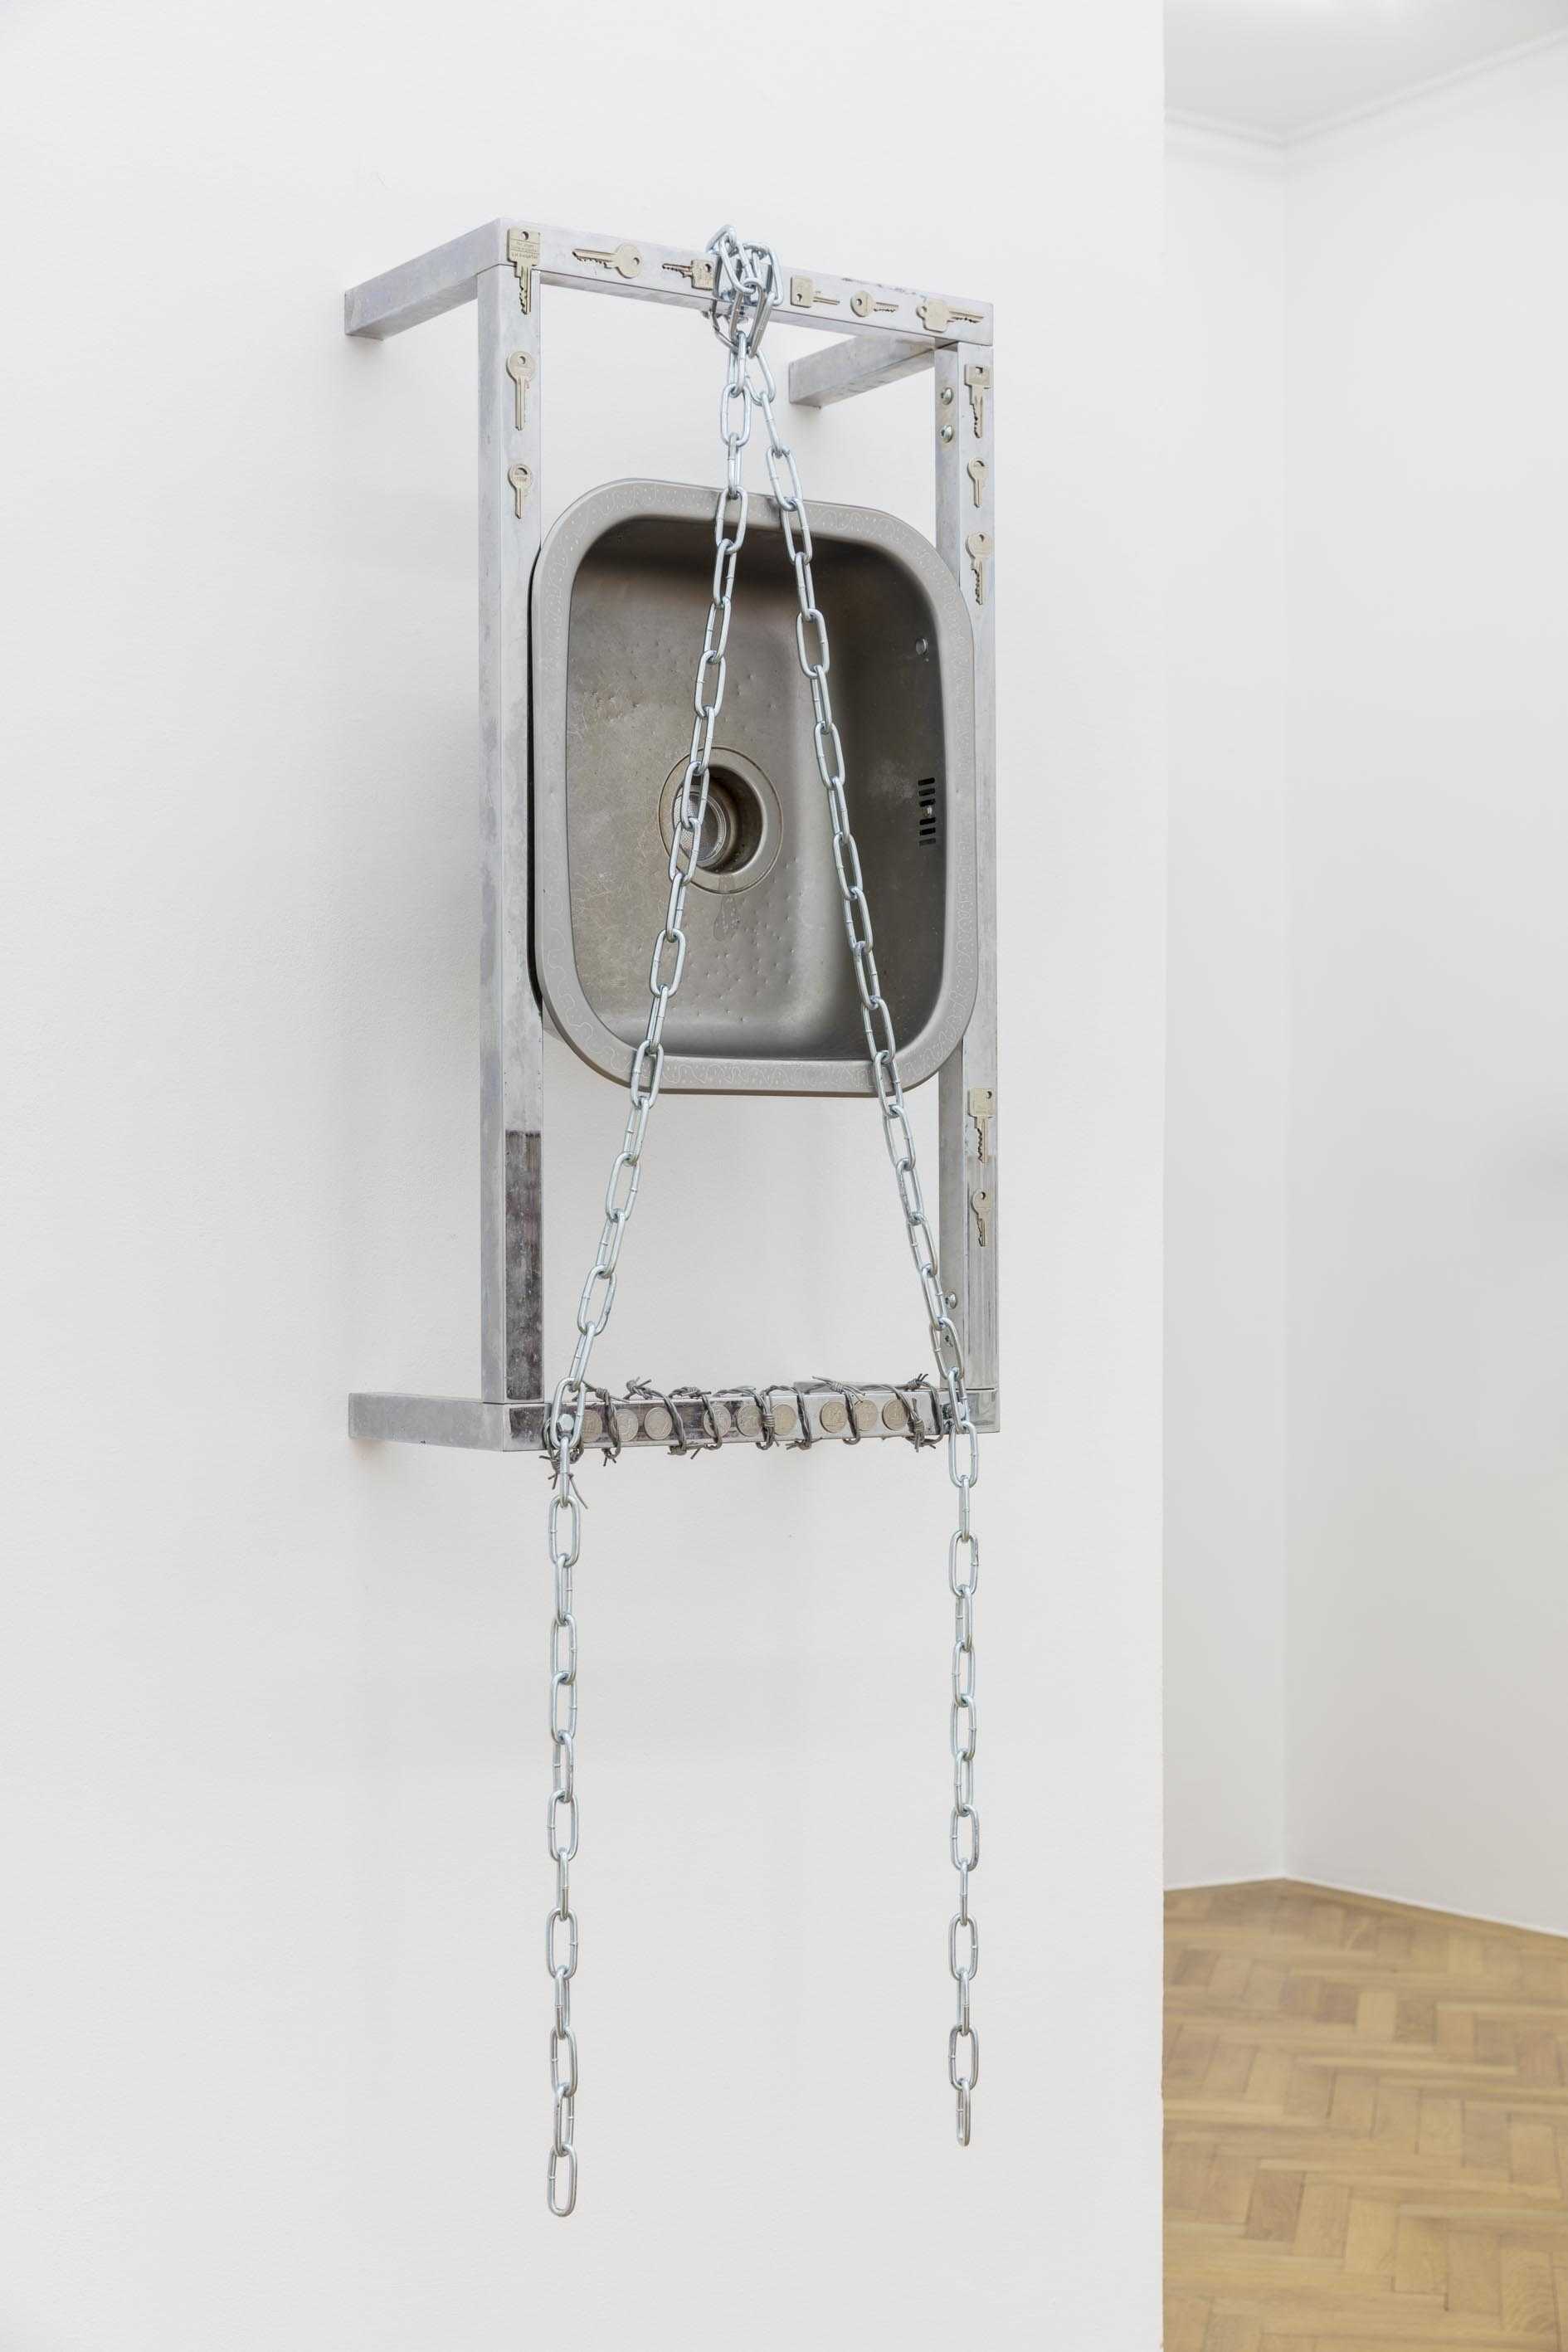 Shackles / Kitchen, 2022, stainless steel, chrome, leather, coins, glue, bolts, wire, keys, 145 x 44.5 x 26.5cm